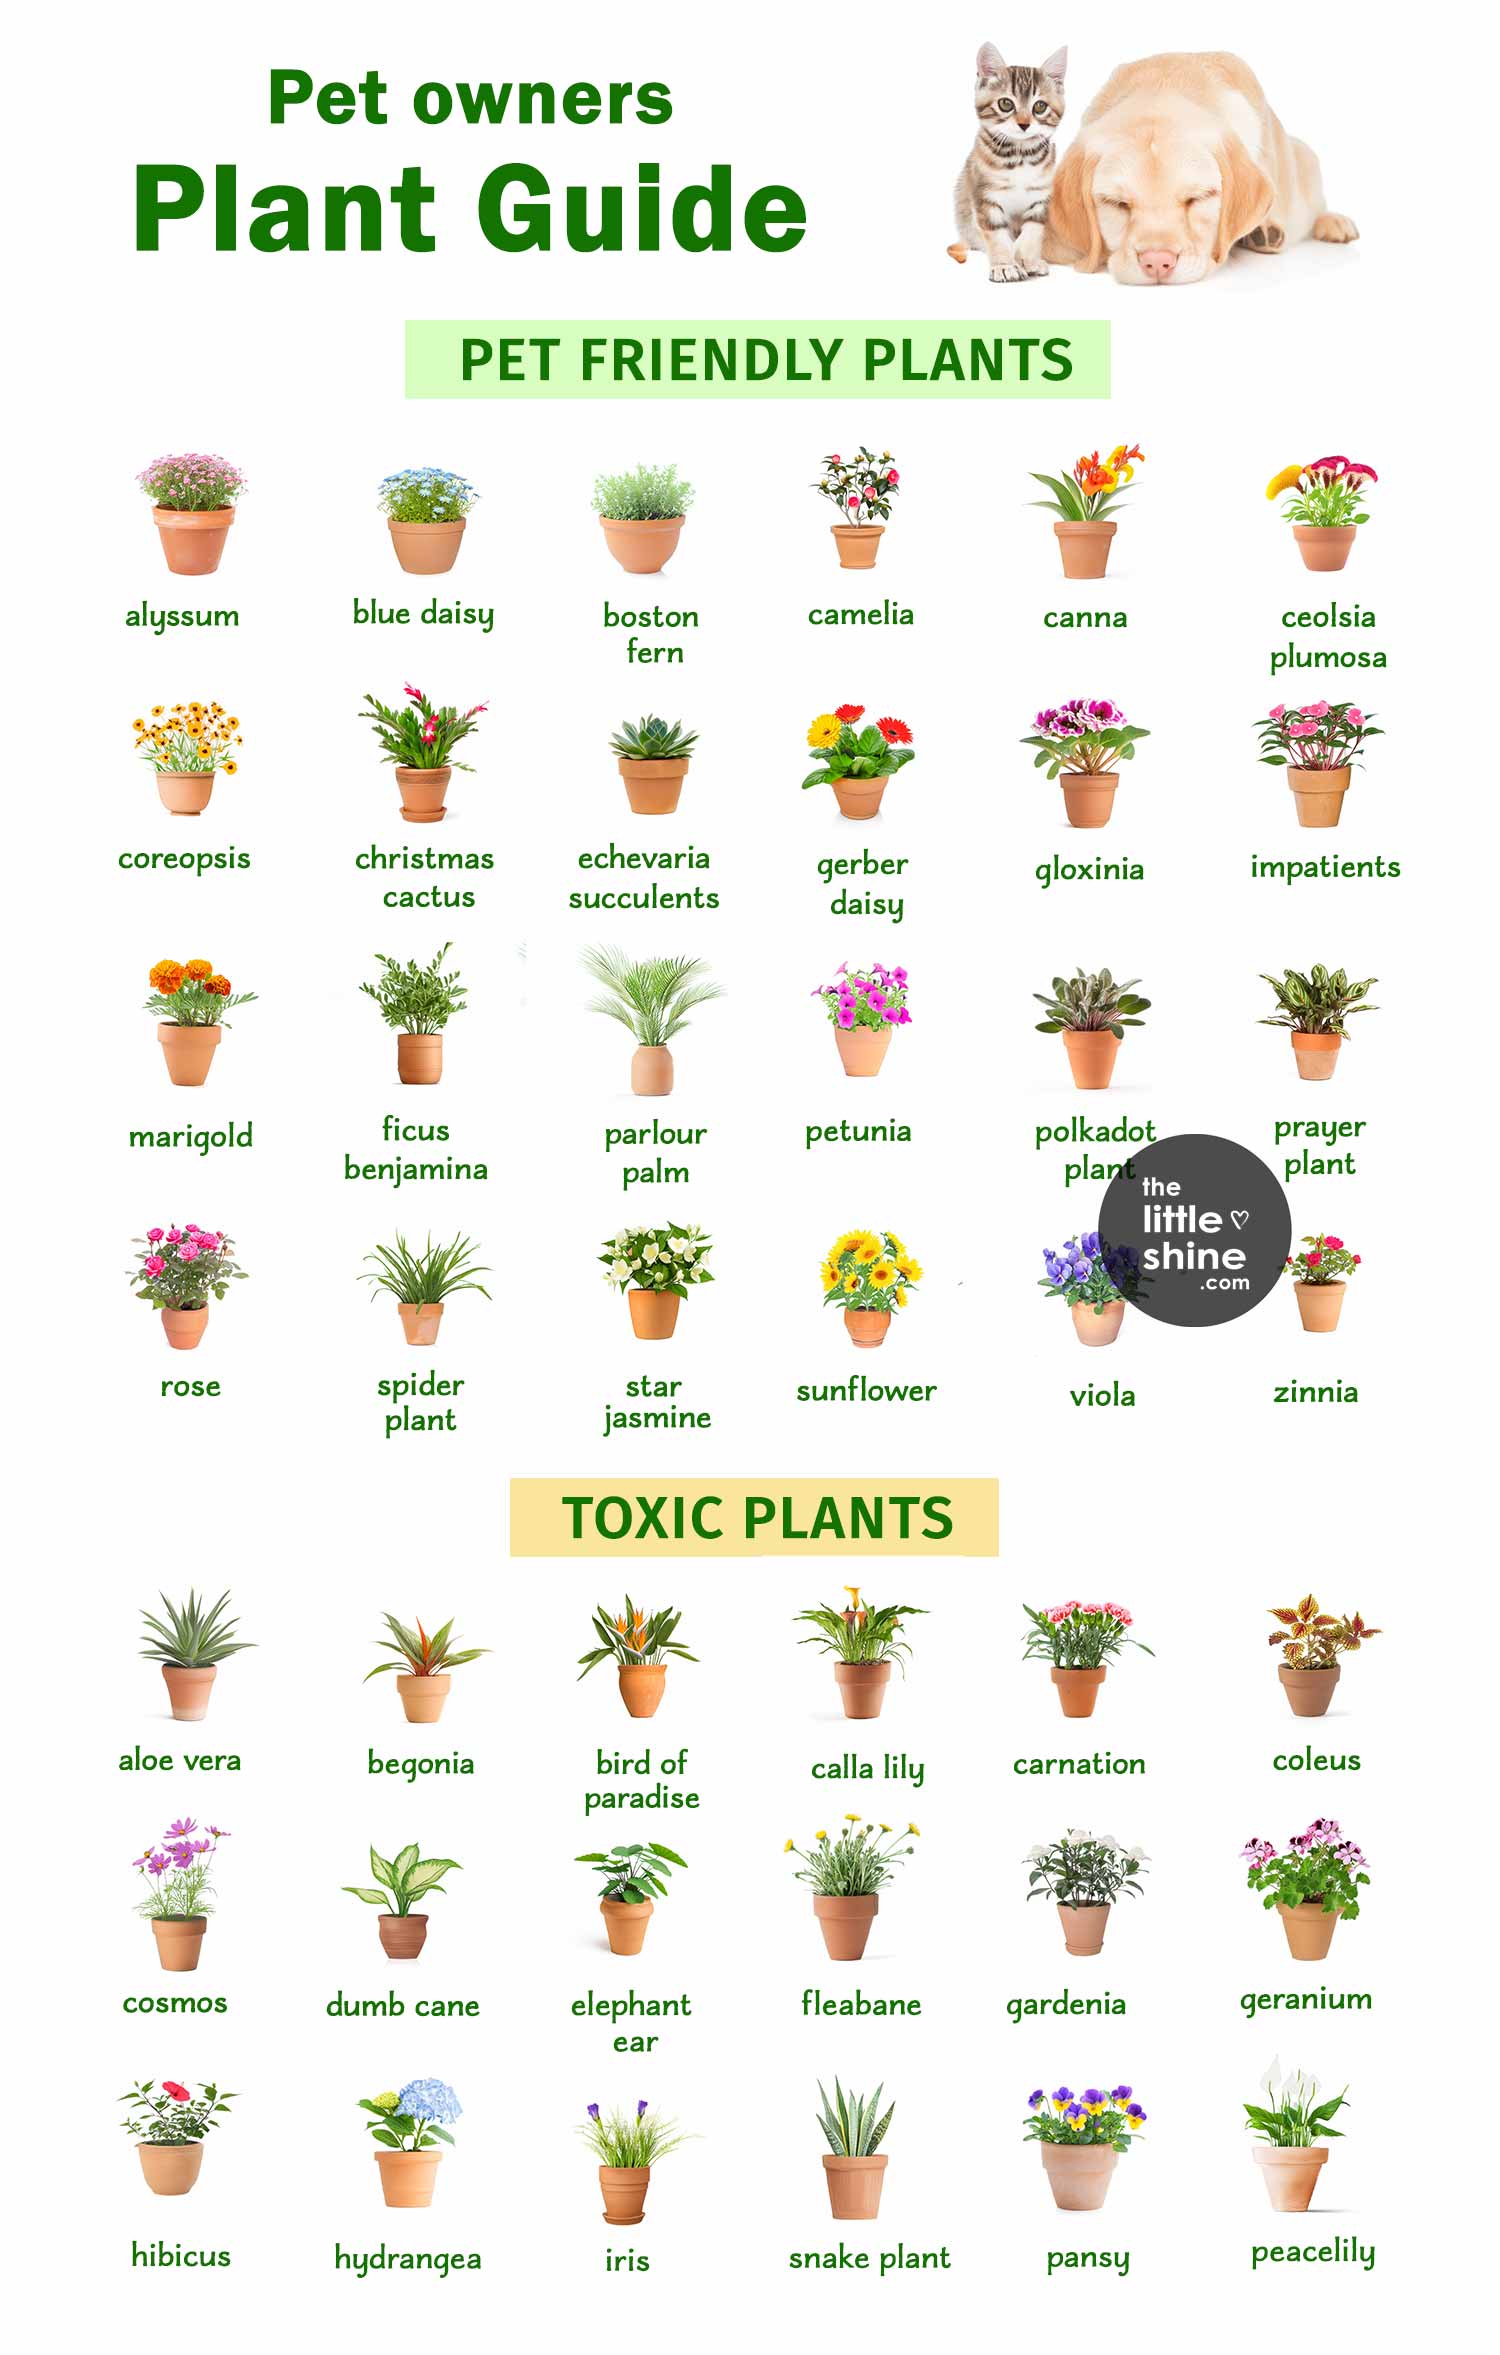 Plant Guide for Pet Owners